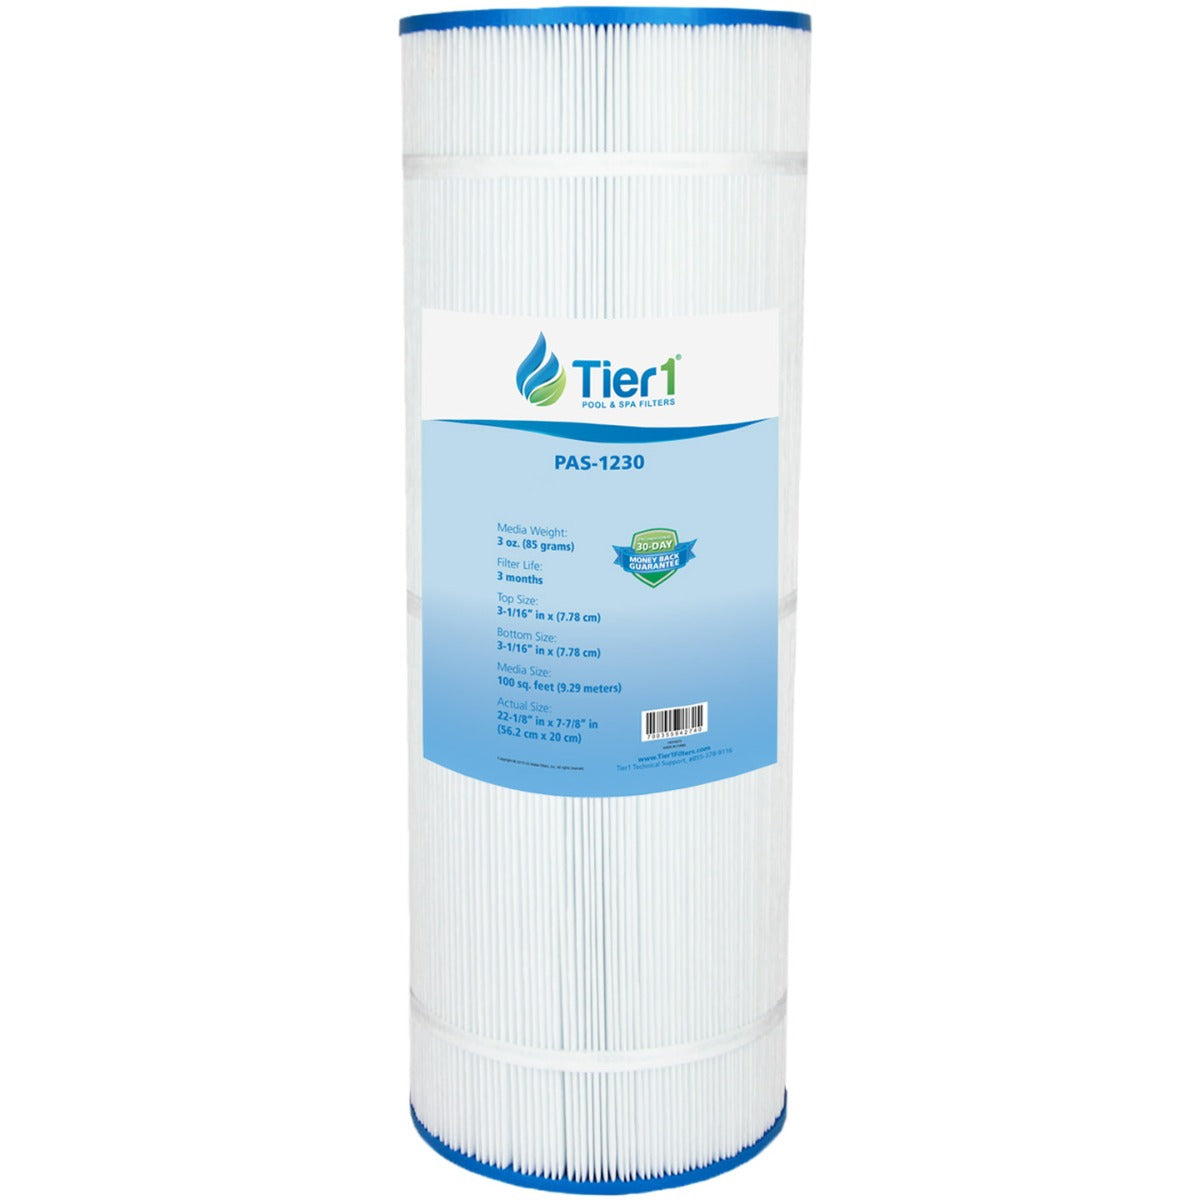 TIER1 PAS-1230 Replacement Pool and Spa Filter